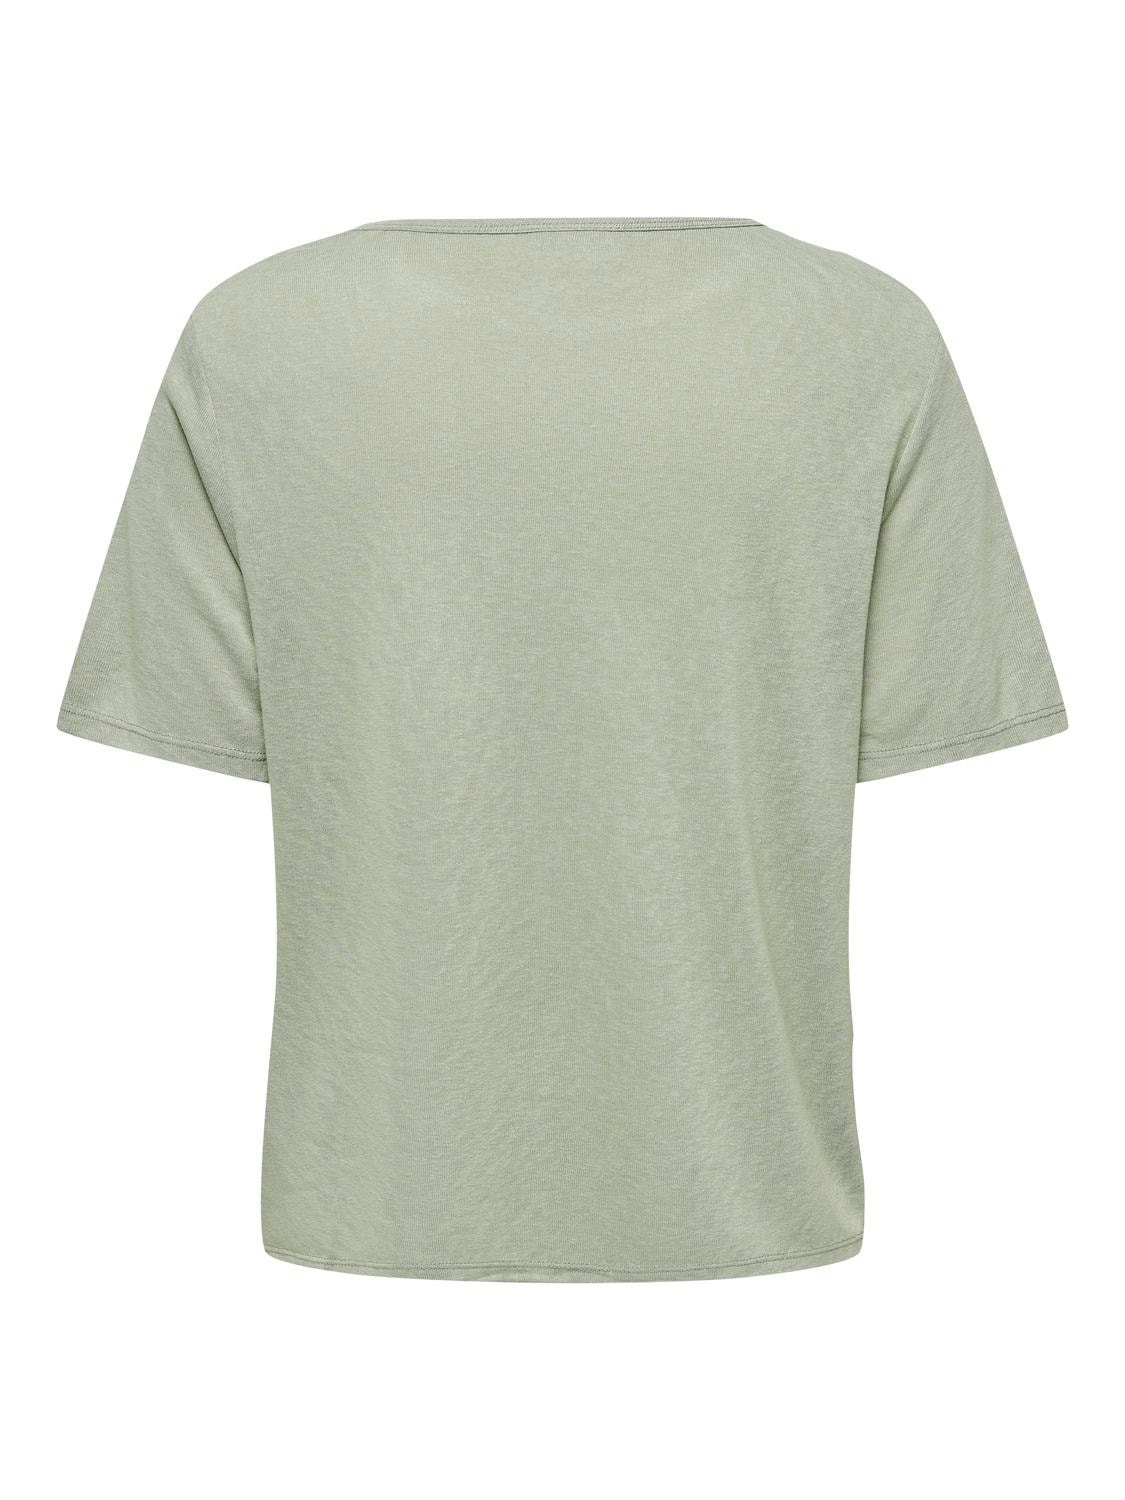 ONLY Regular Fit O-Neck T-Shirt -Seagrass - 15290780